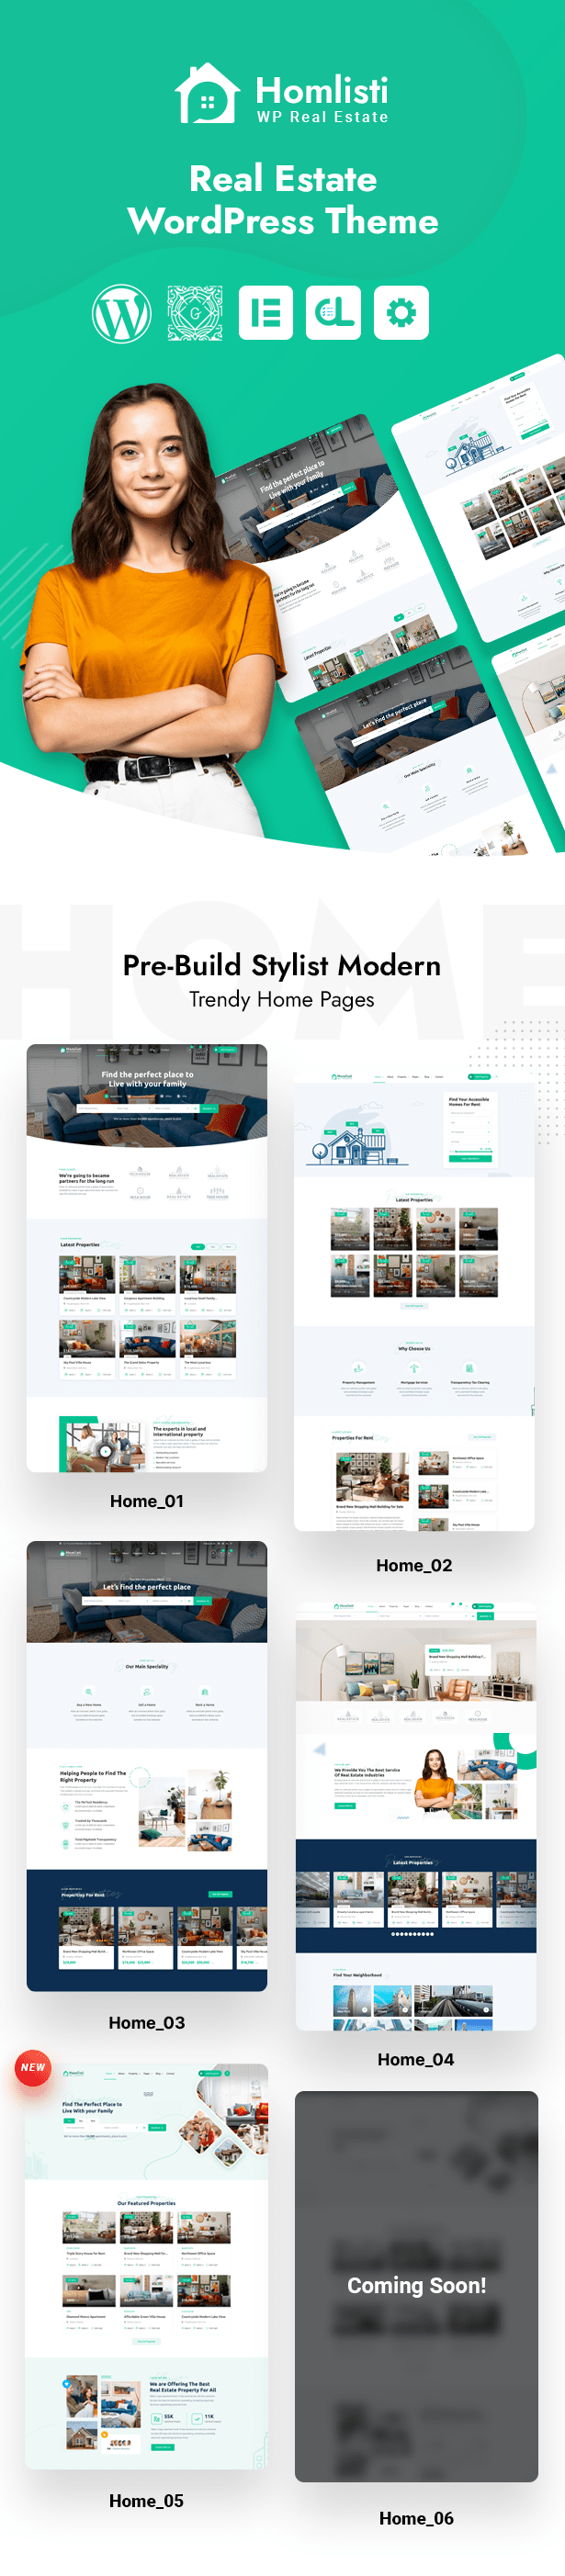 Light template with a green home page.